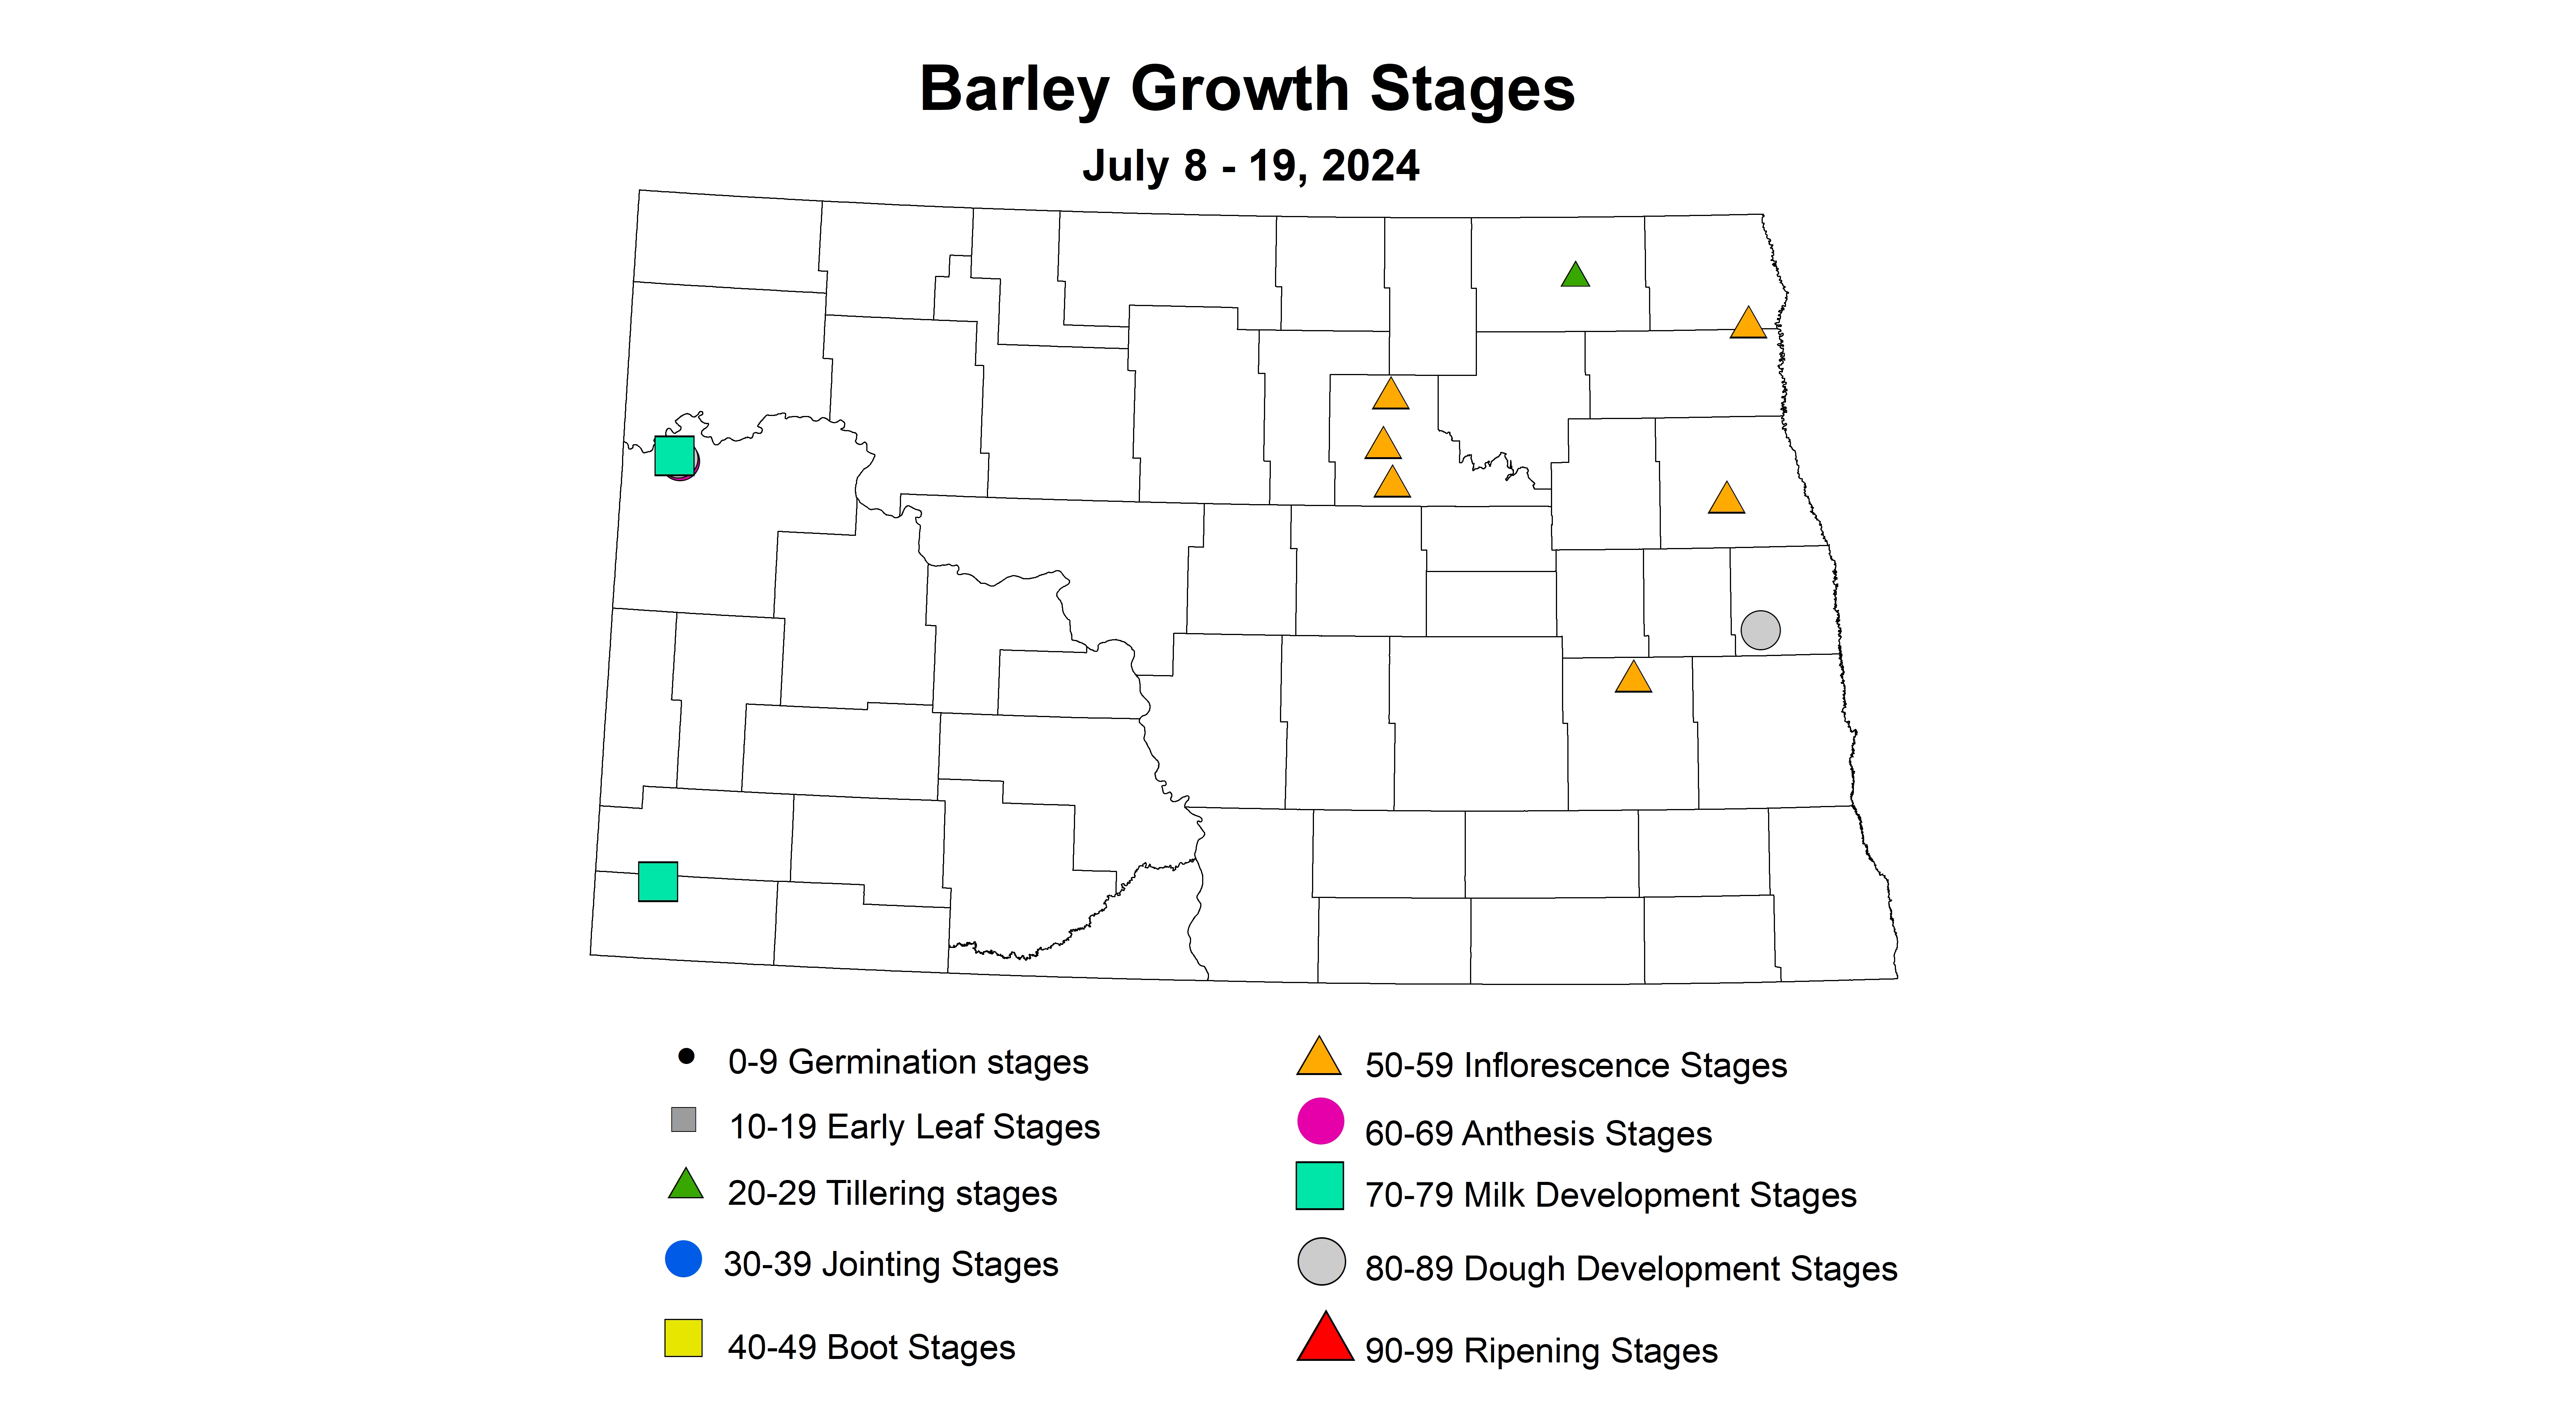 barley growth stages July 8-19 2024